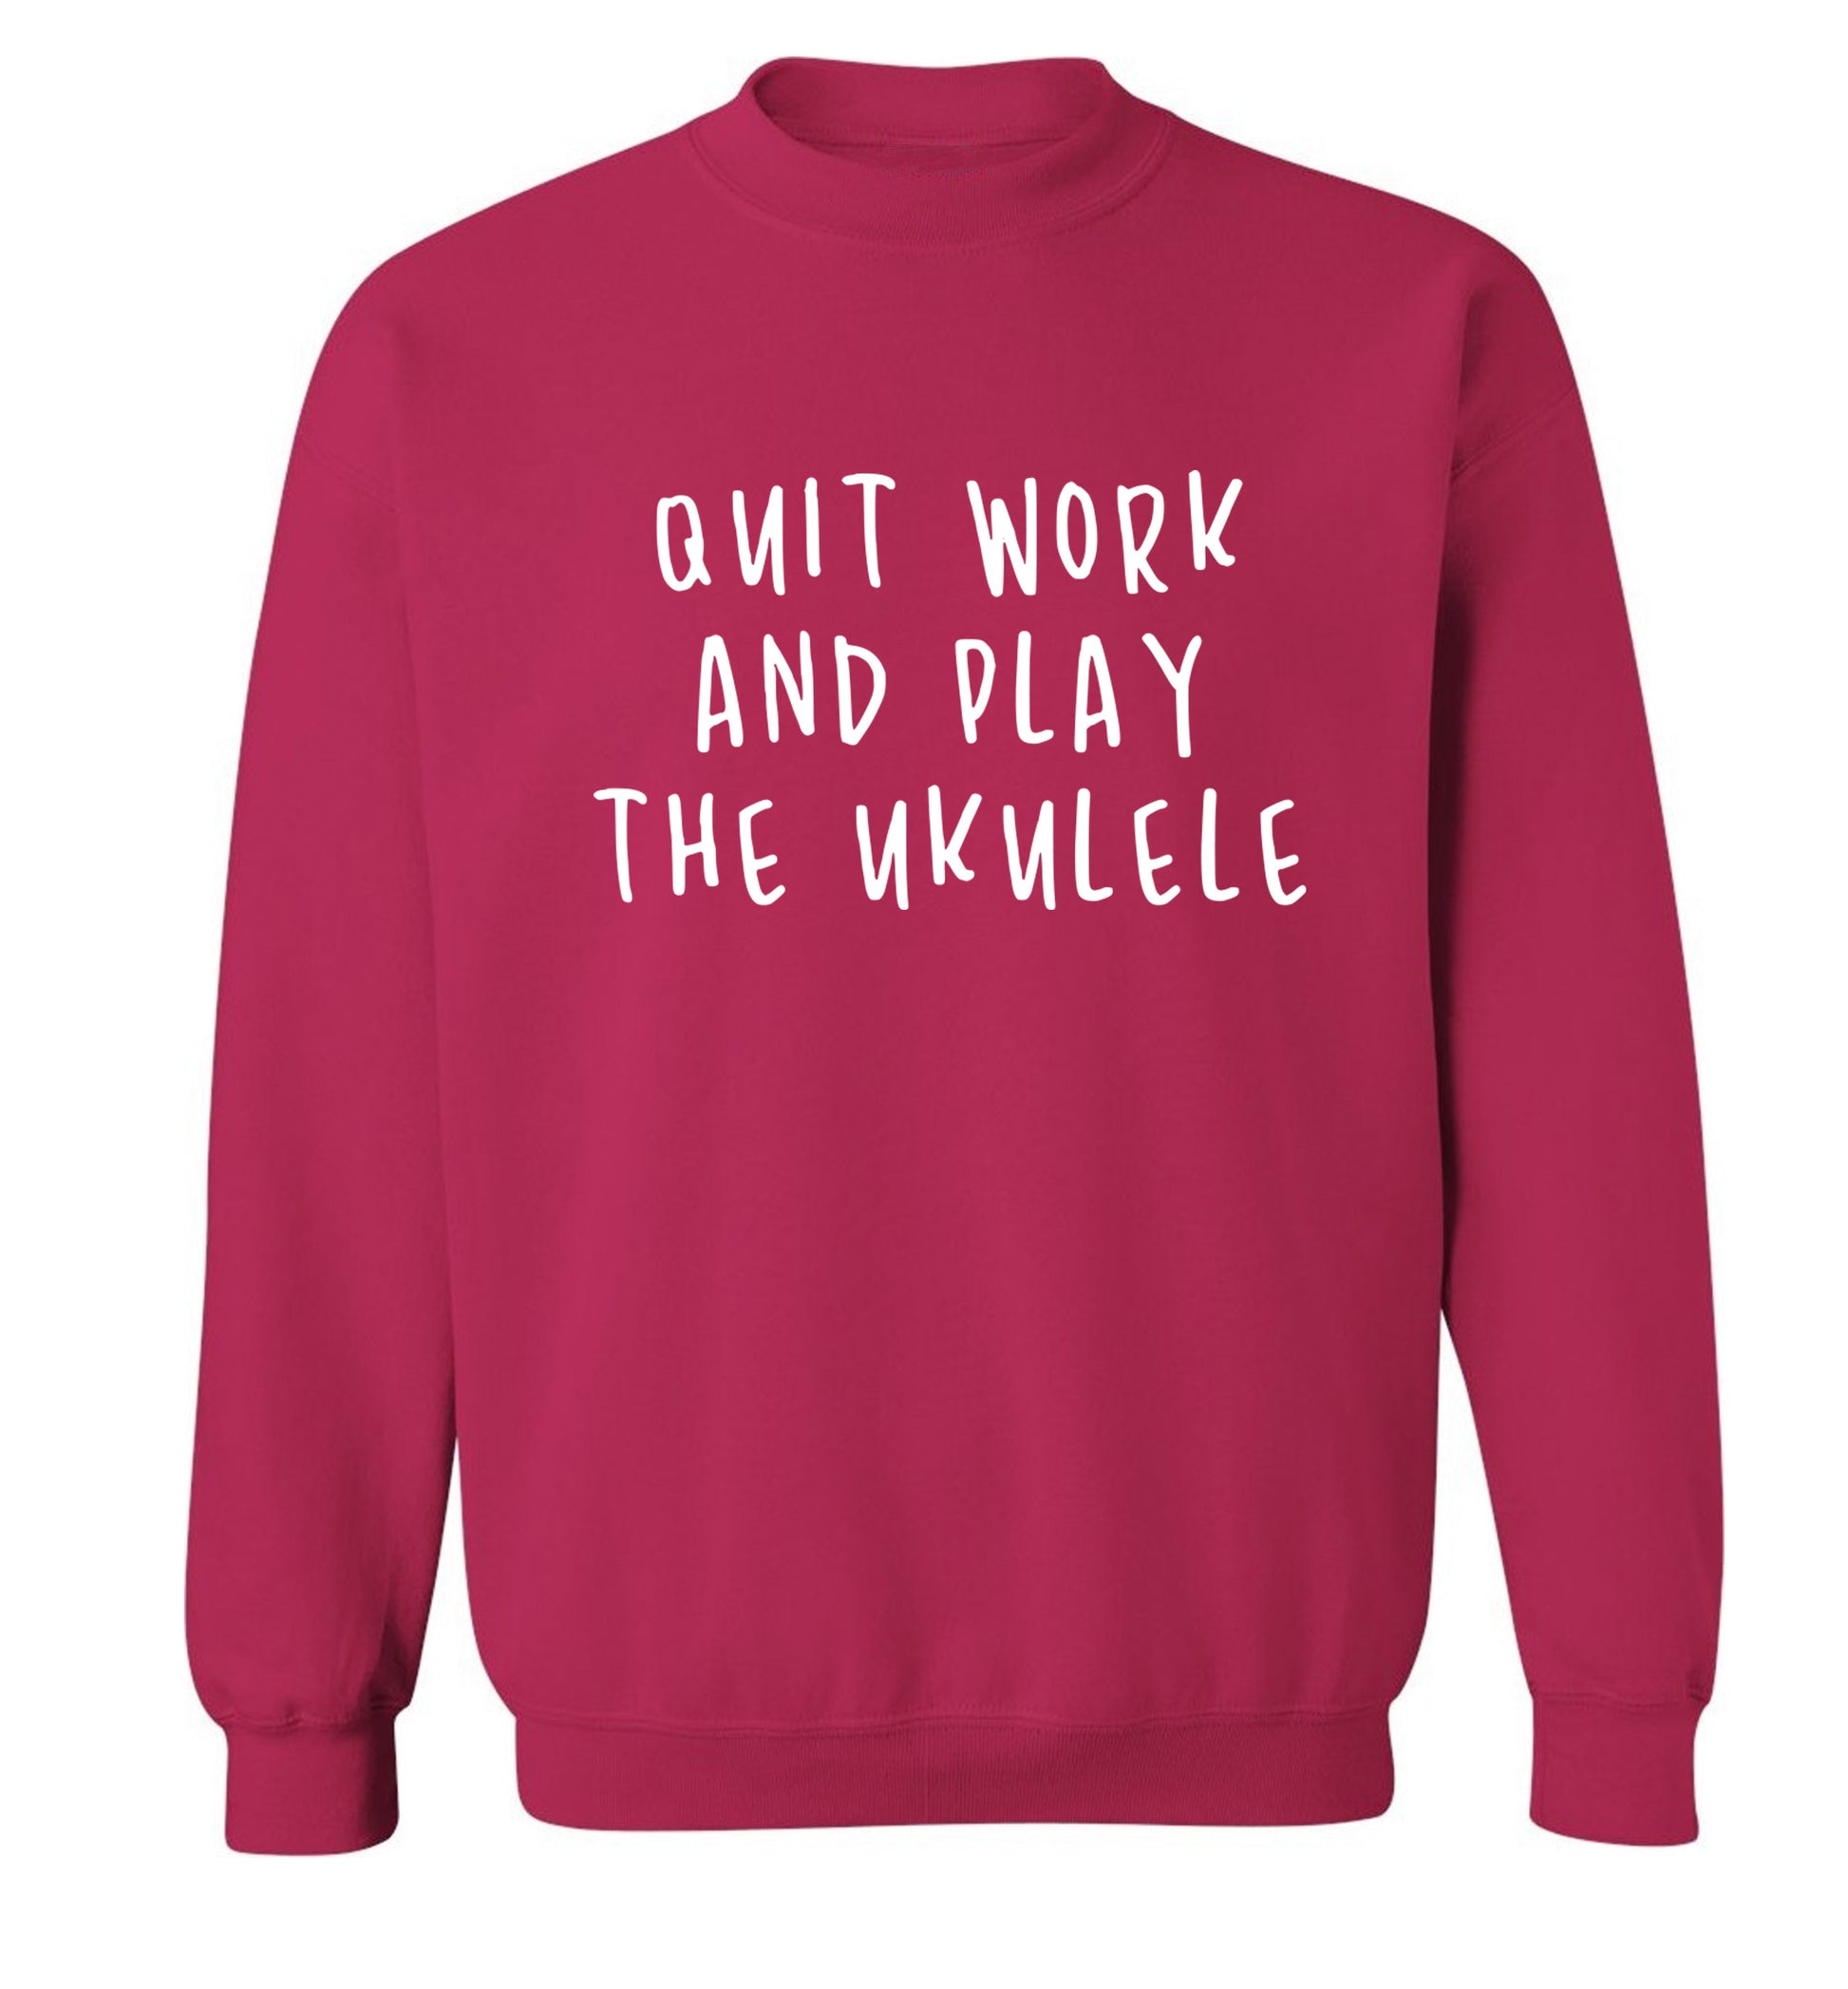 Quit work and play the ukulele Adult's unisex pink Sweater 2XL